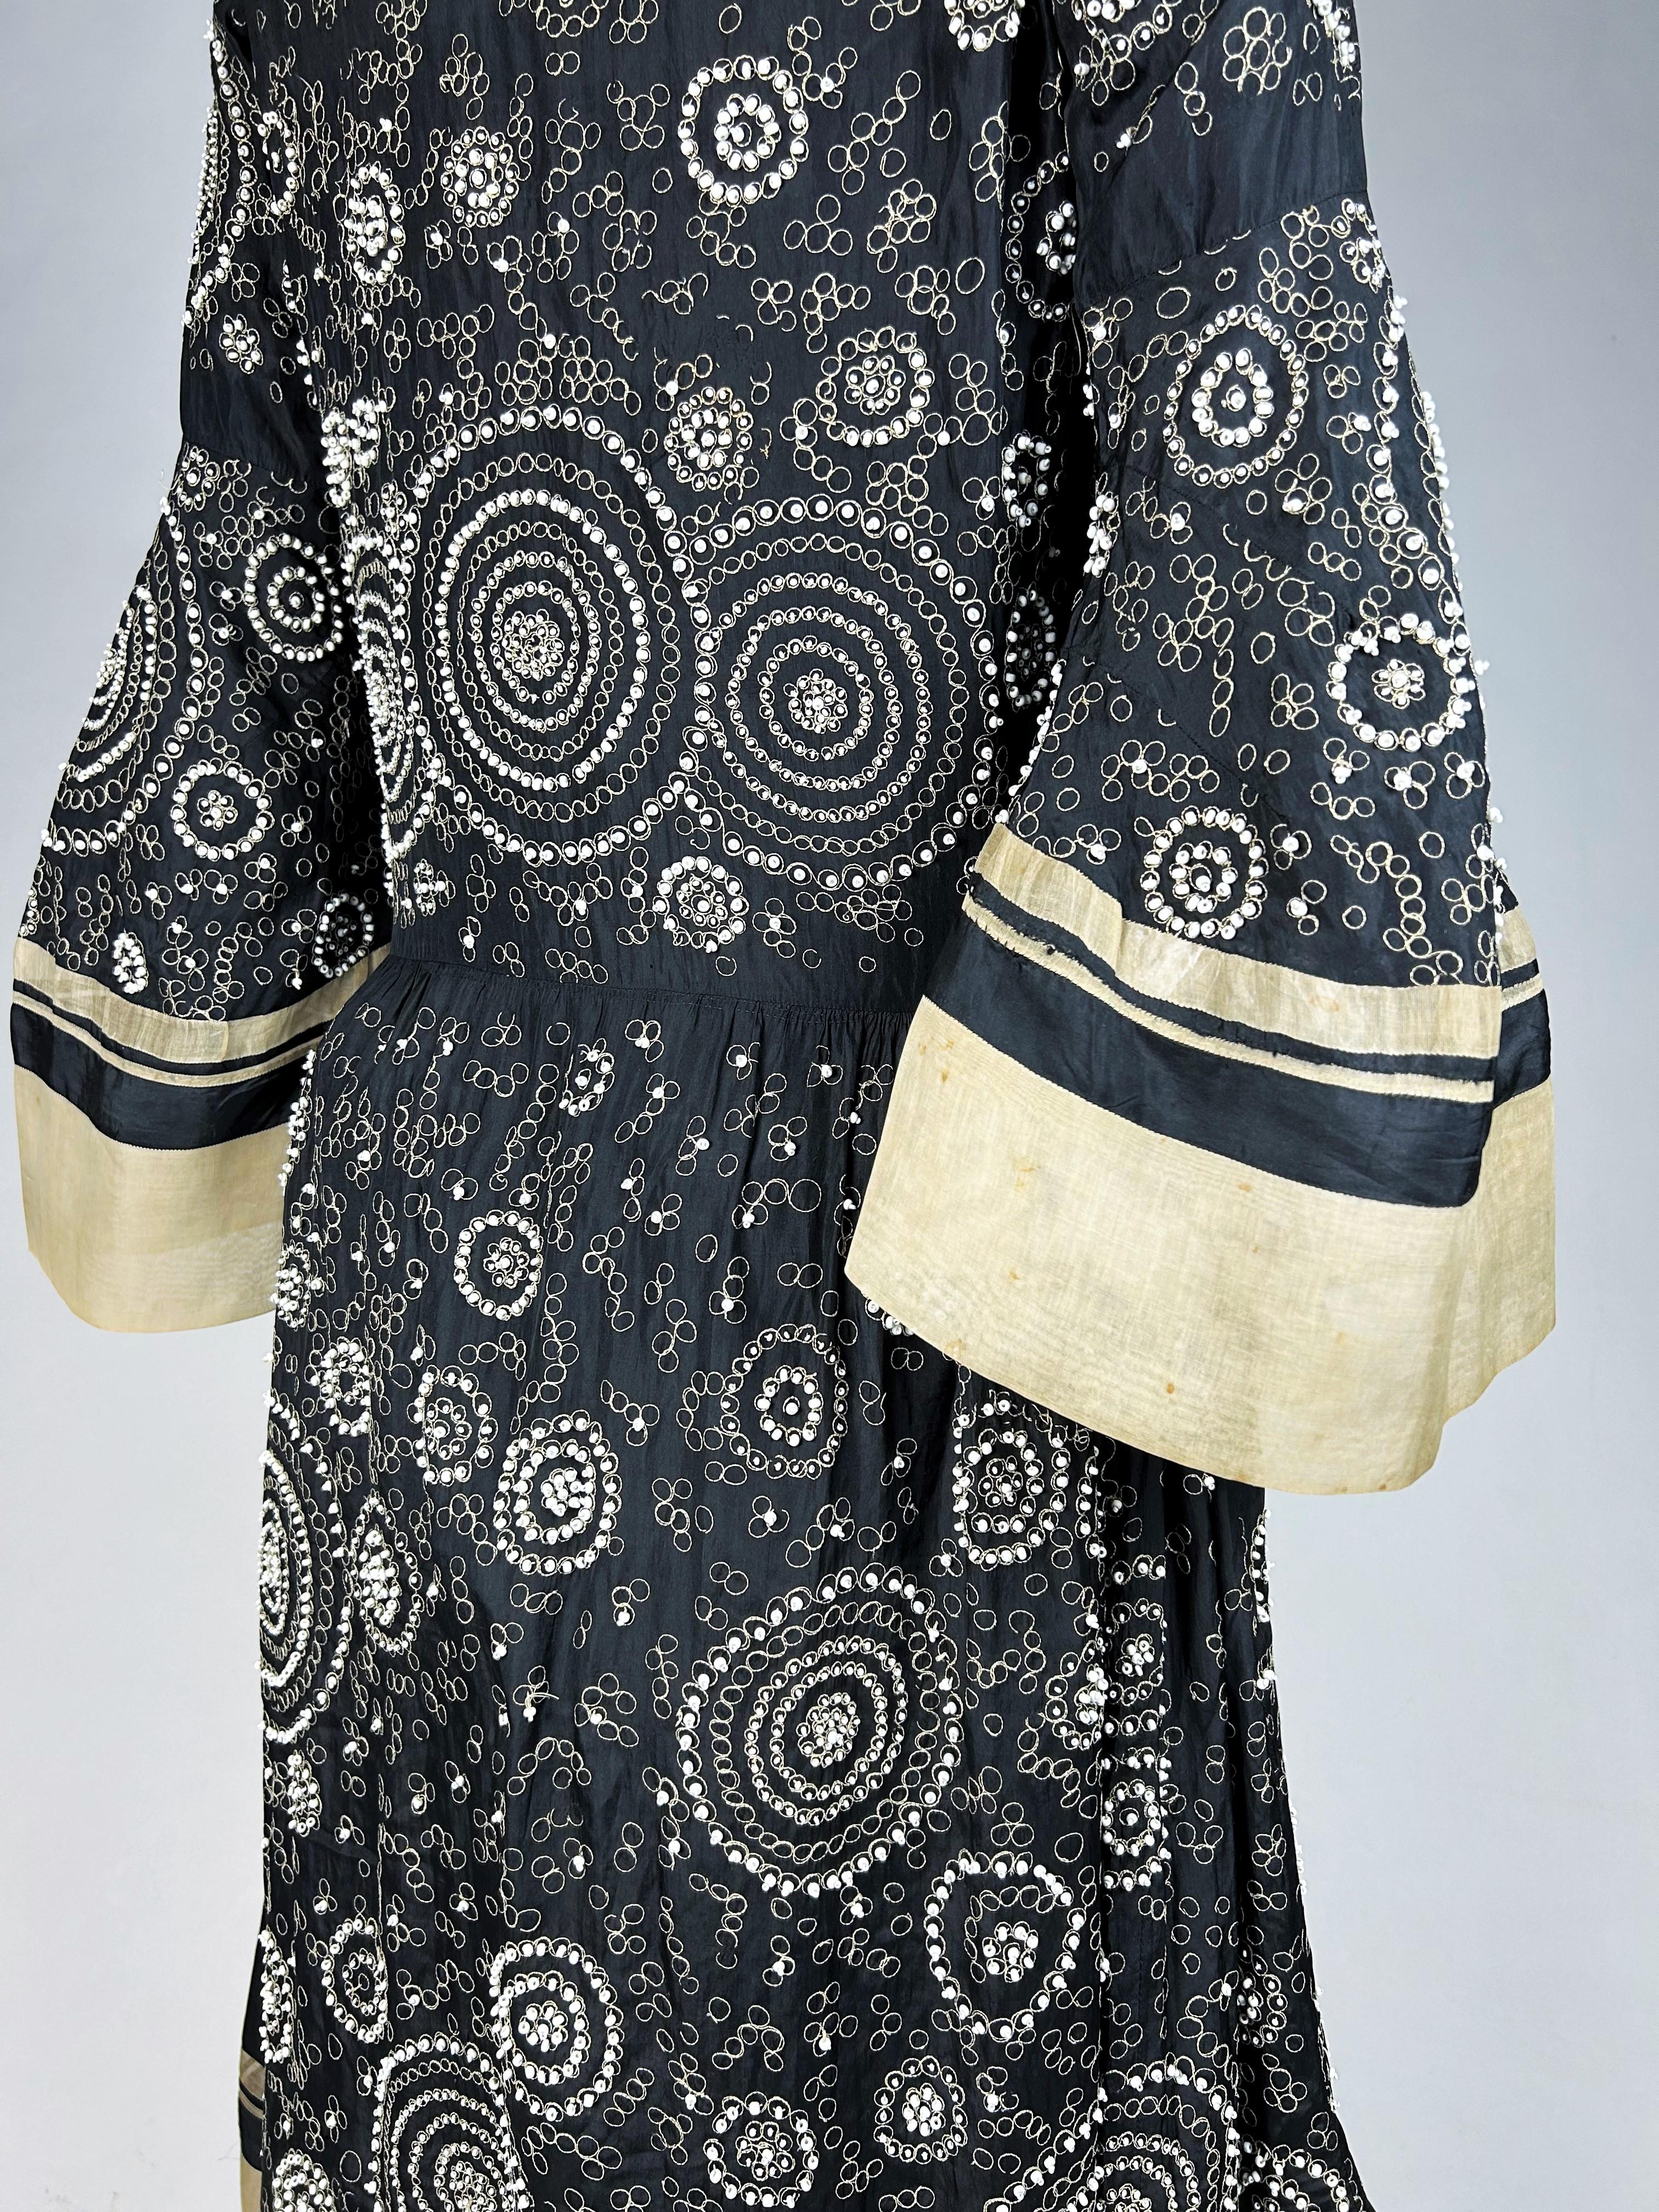 Evening dress by Jeanne Lanvin Haute Couture numbered 66780- Paris Summer 1924 For Sale 4